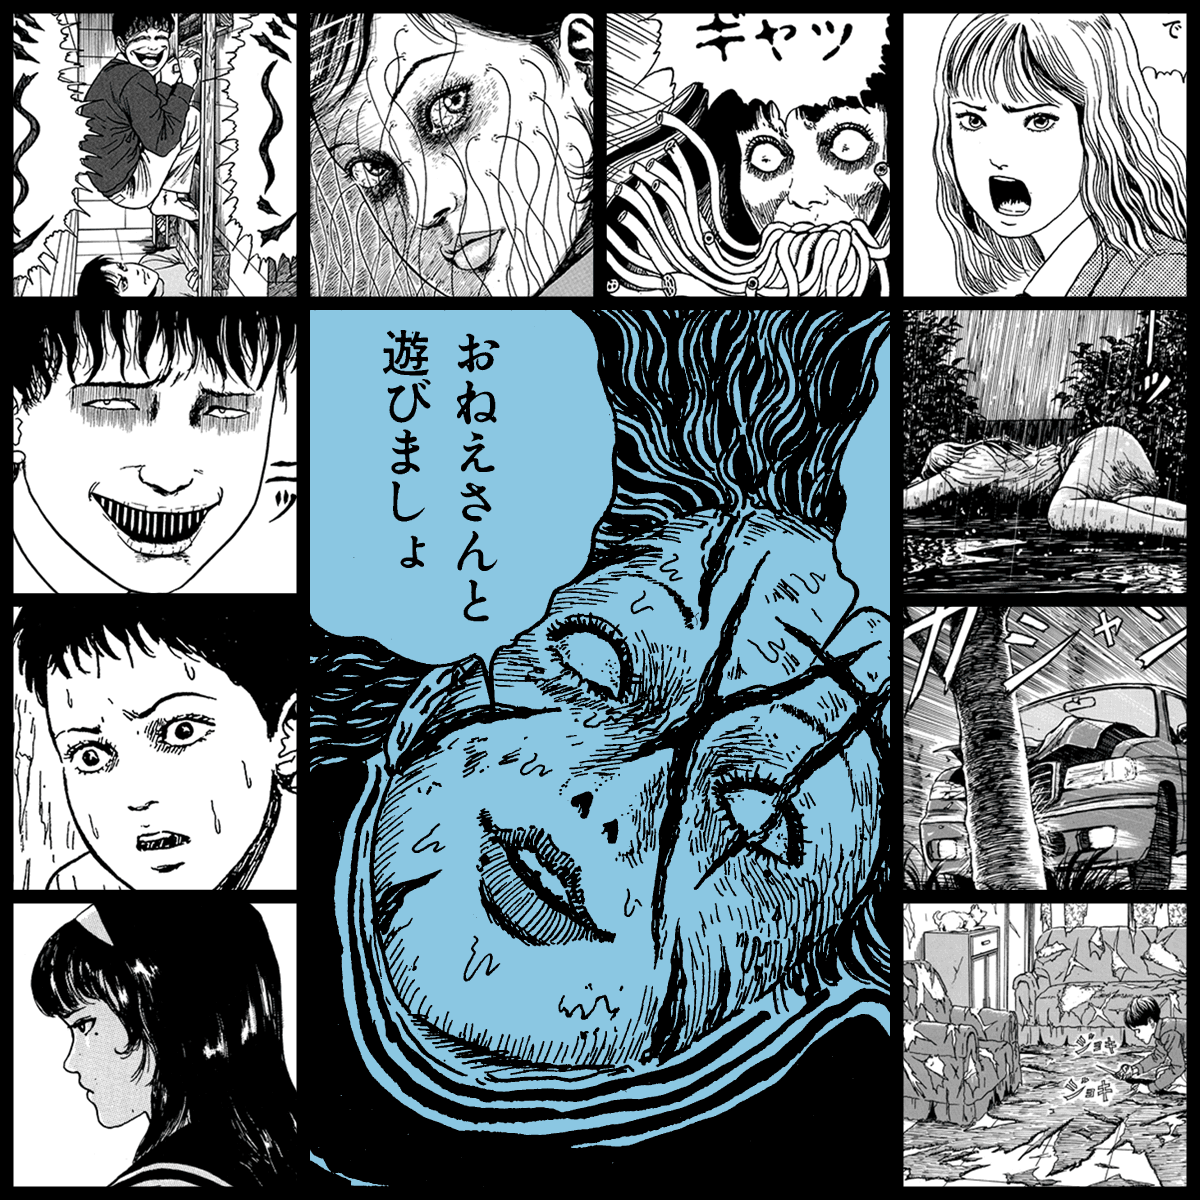 TOMIE by Junji Ito #1793